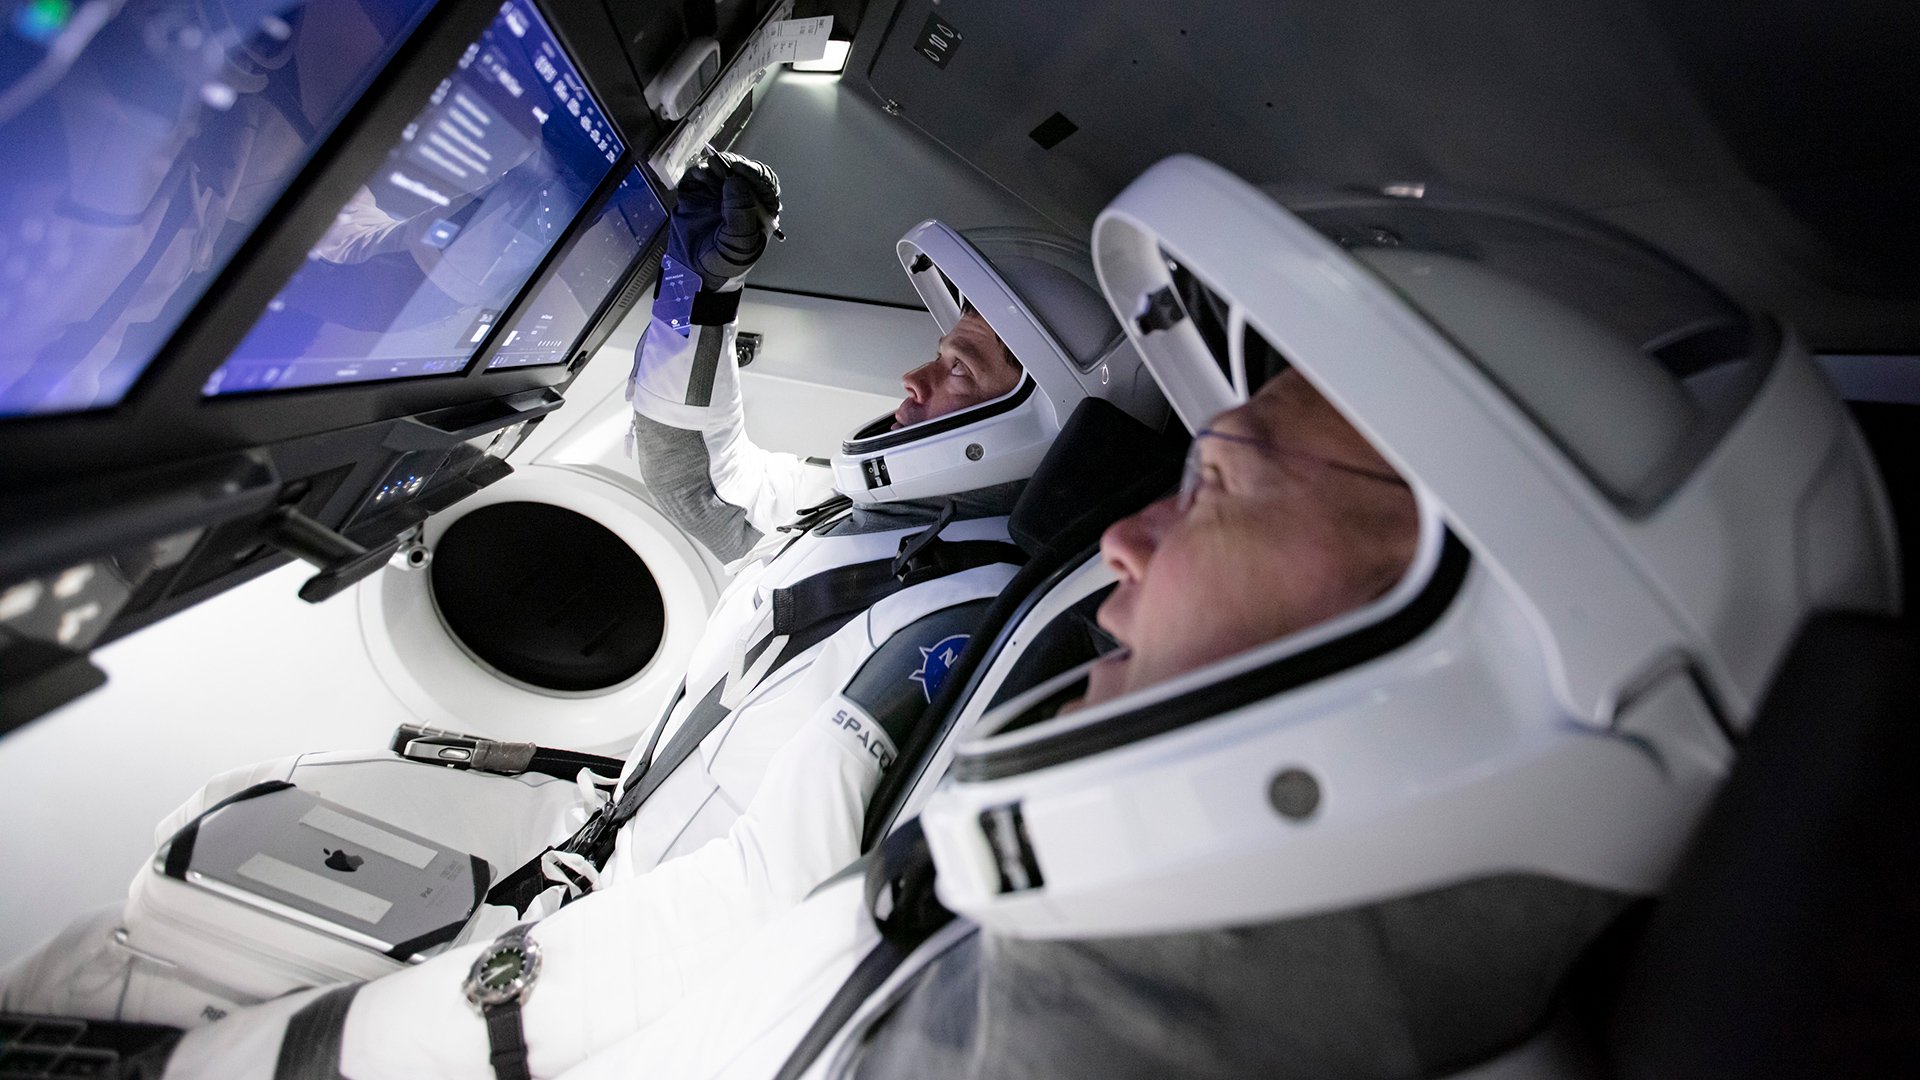 SpaceX launched its first manned mission to the ISS this week. Image: SpaceX.